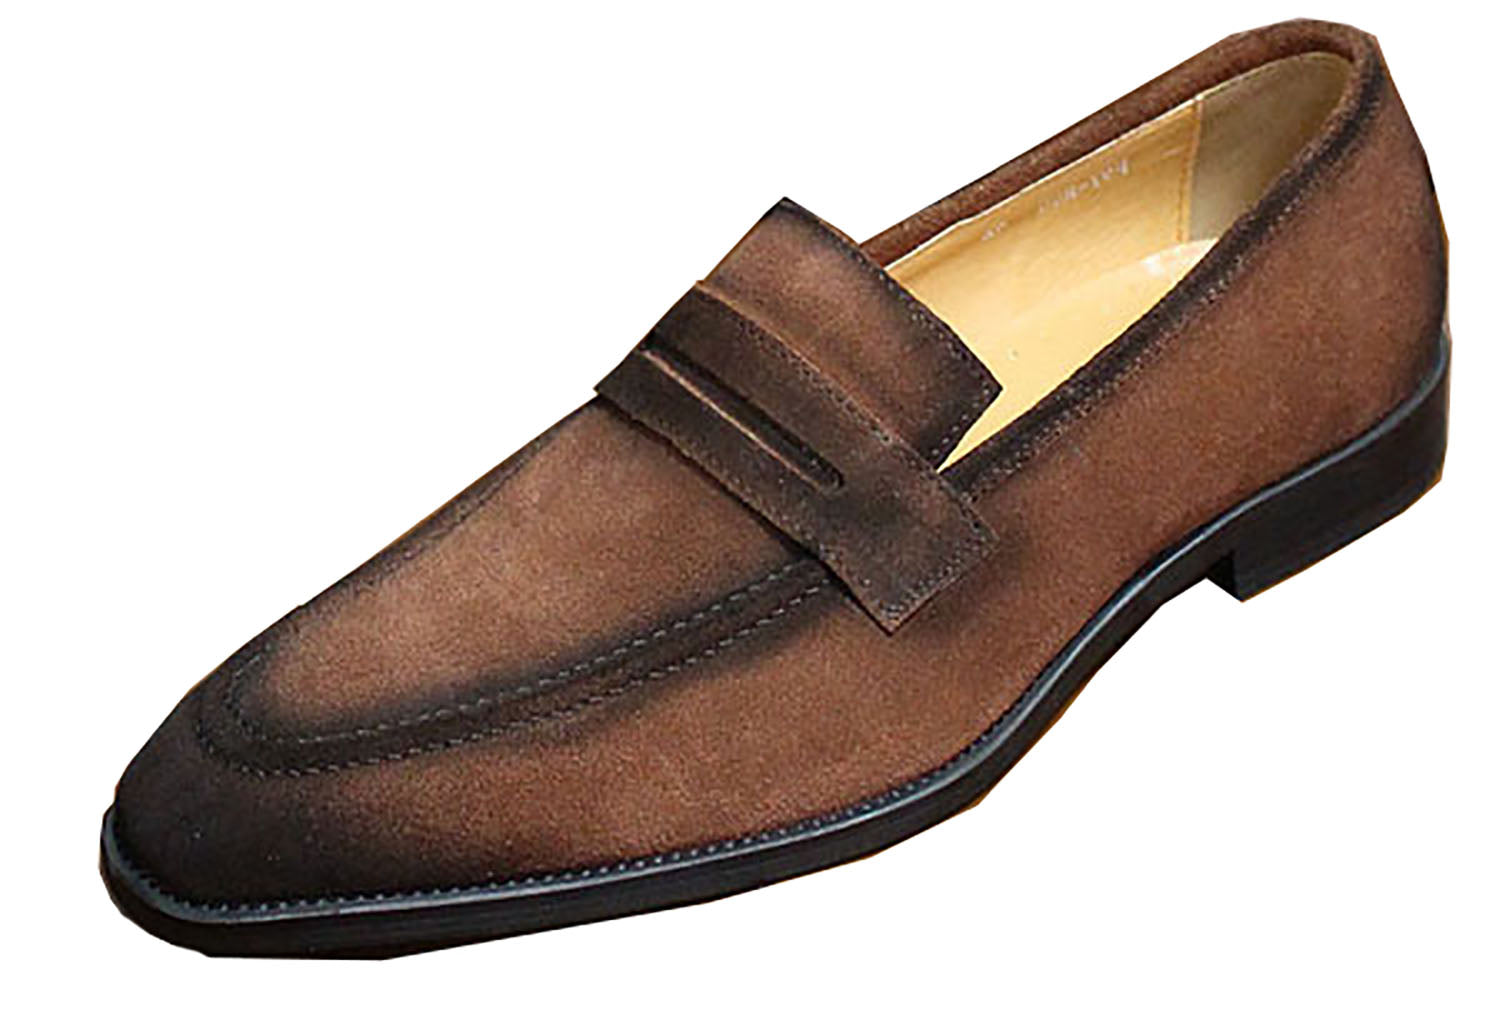 Men's Handmade Suede Silp On Penny Loafers